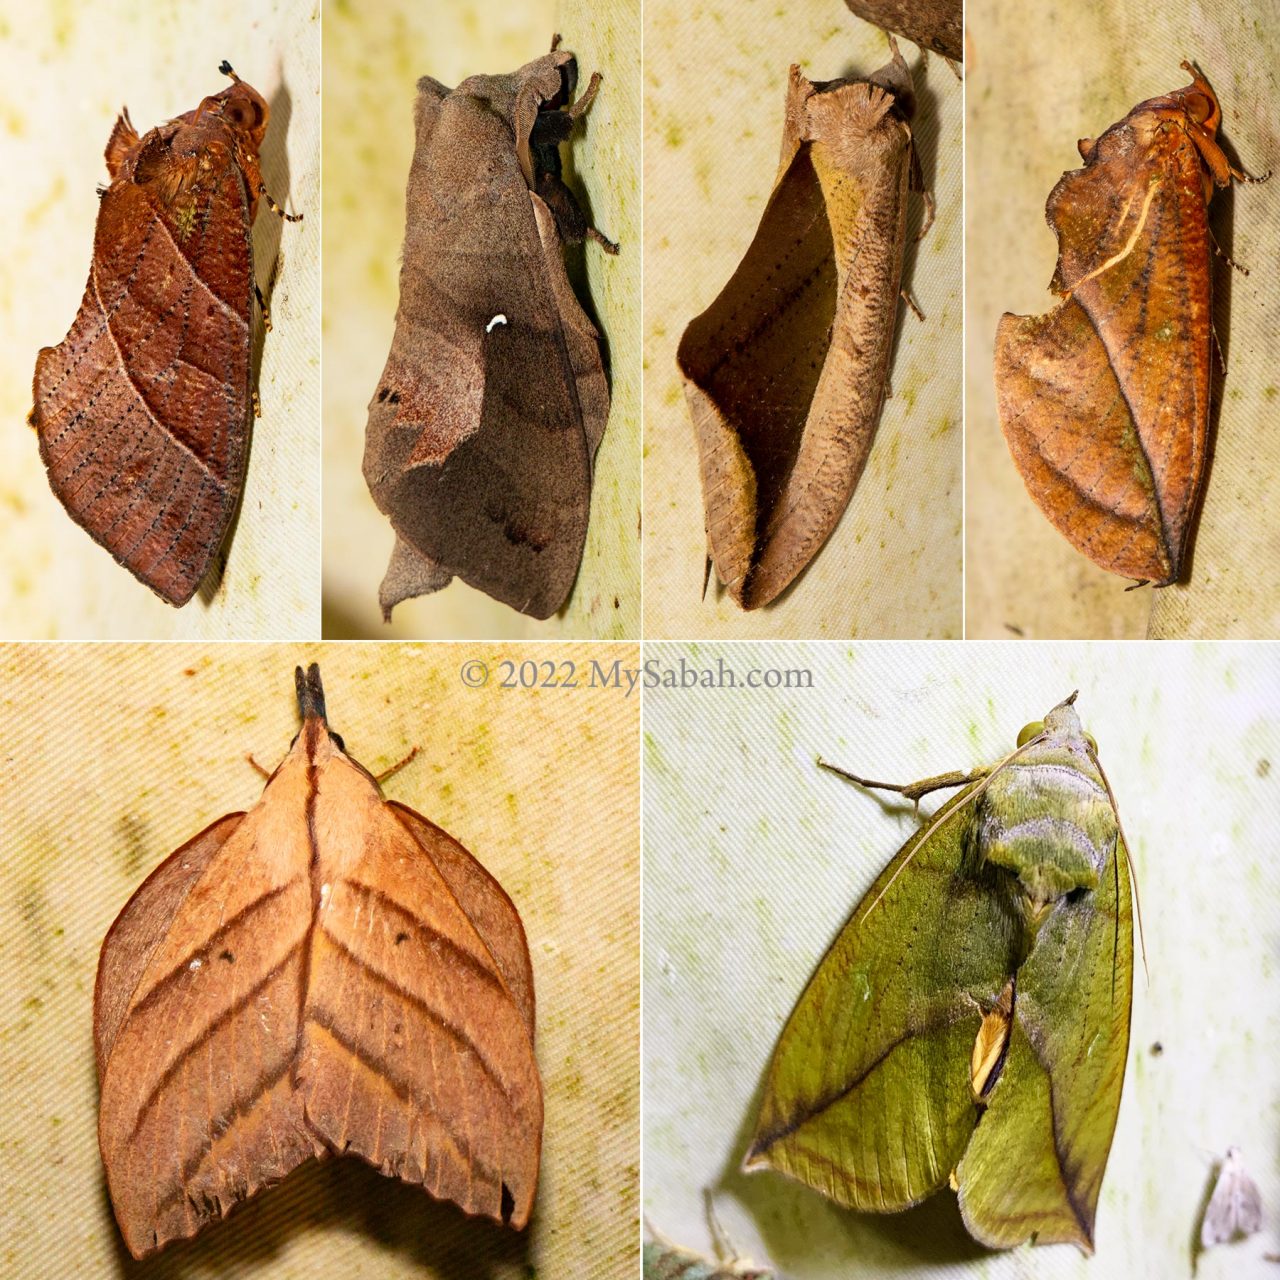 Borneo moths that mimic the shapes and colours of leaf